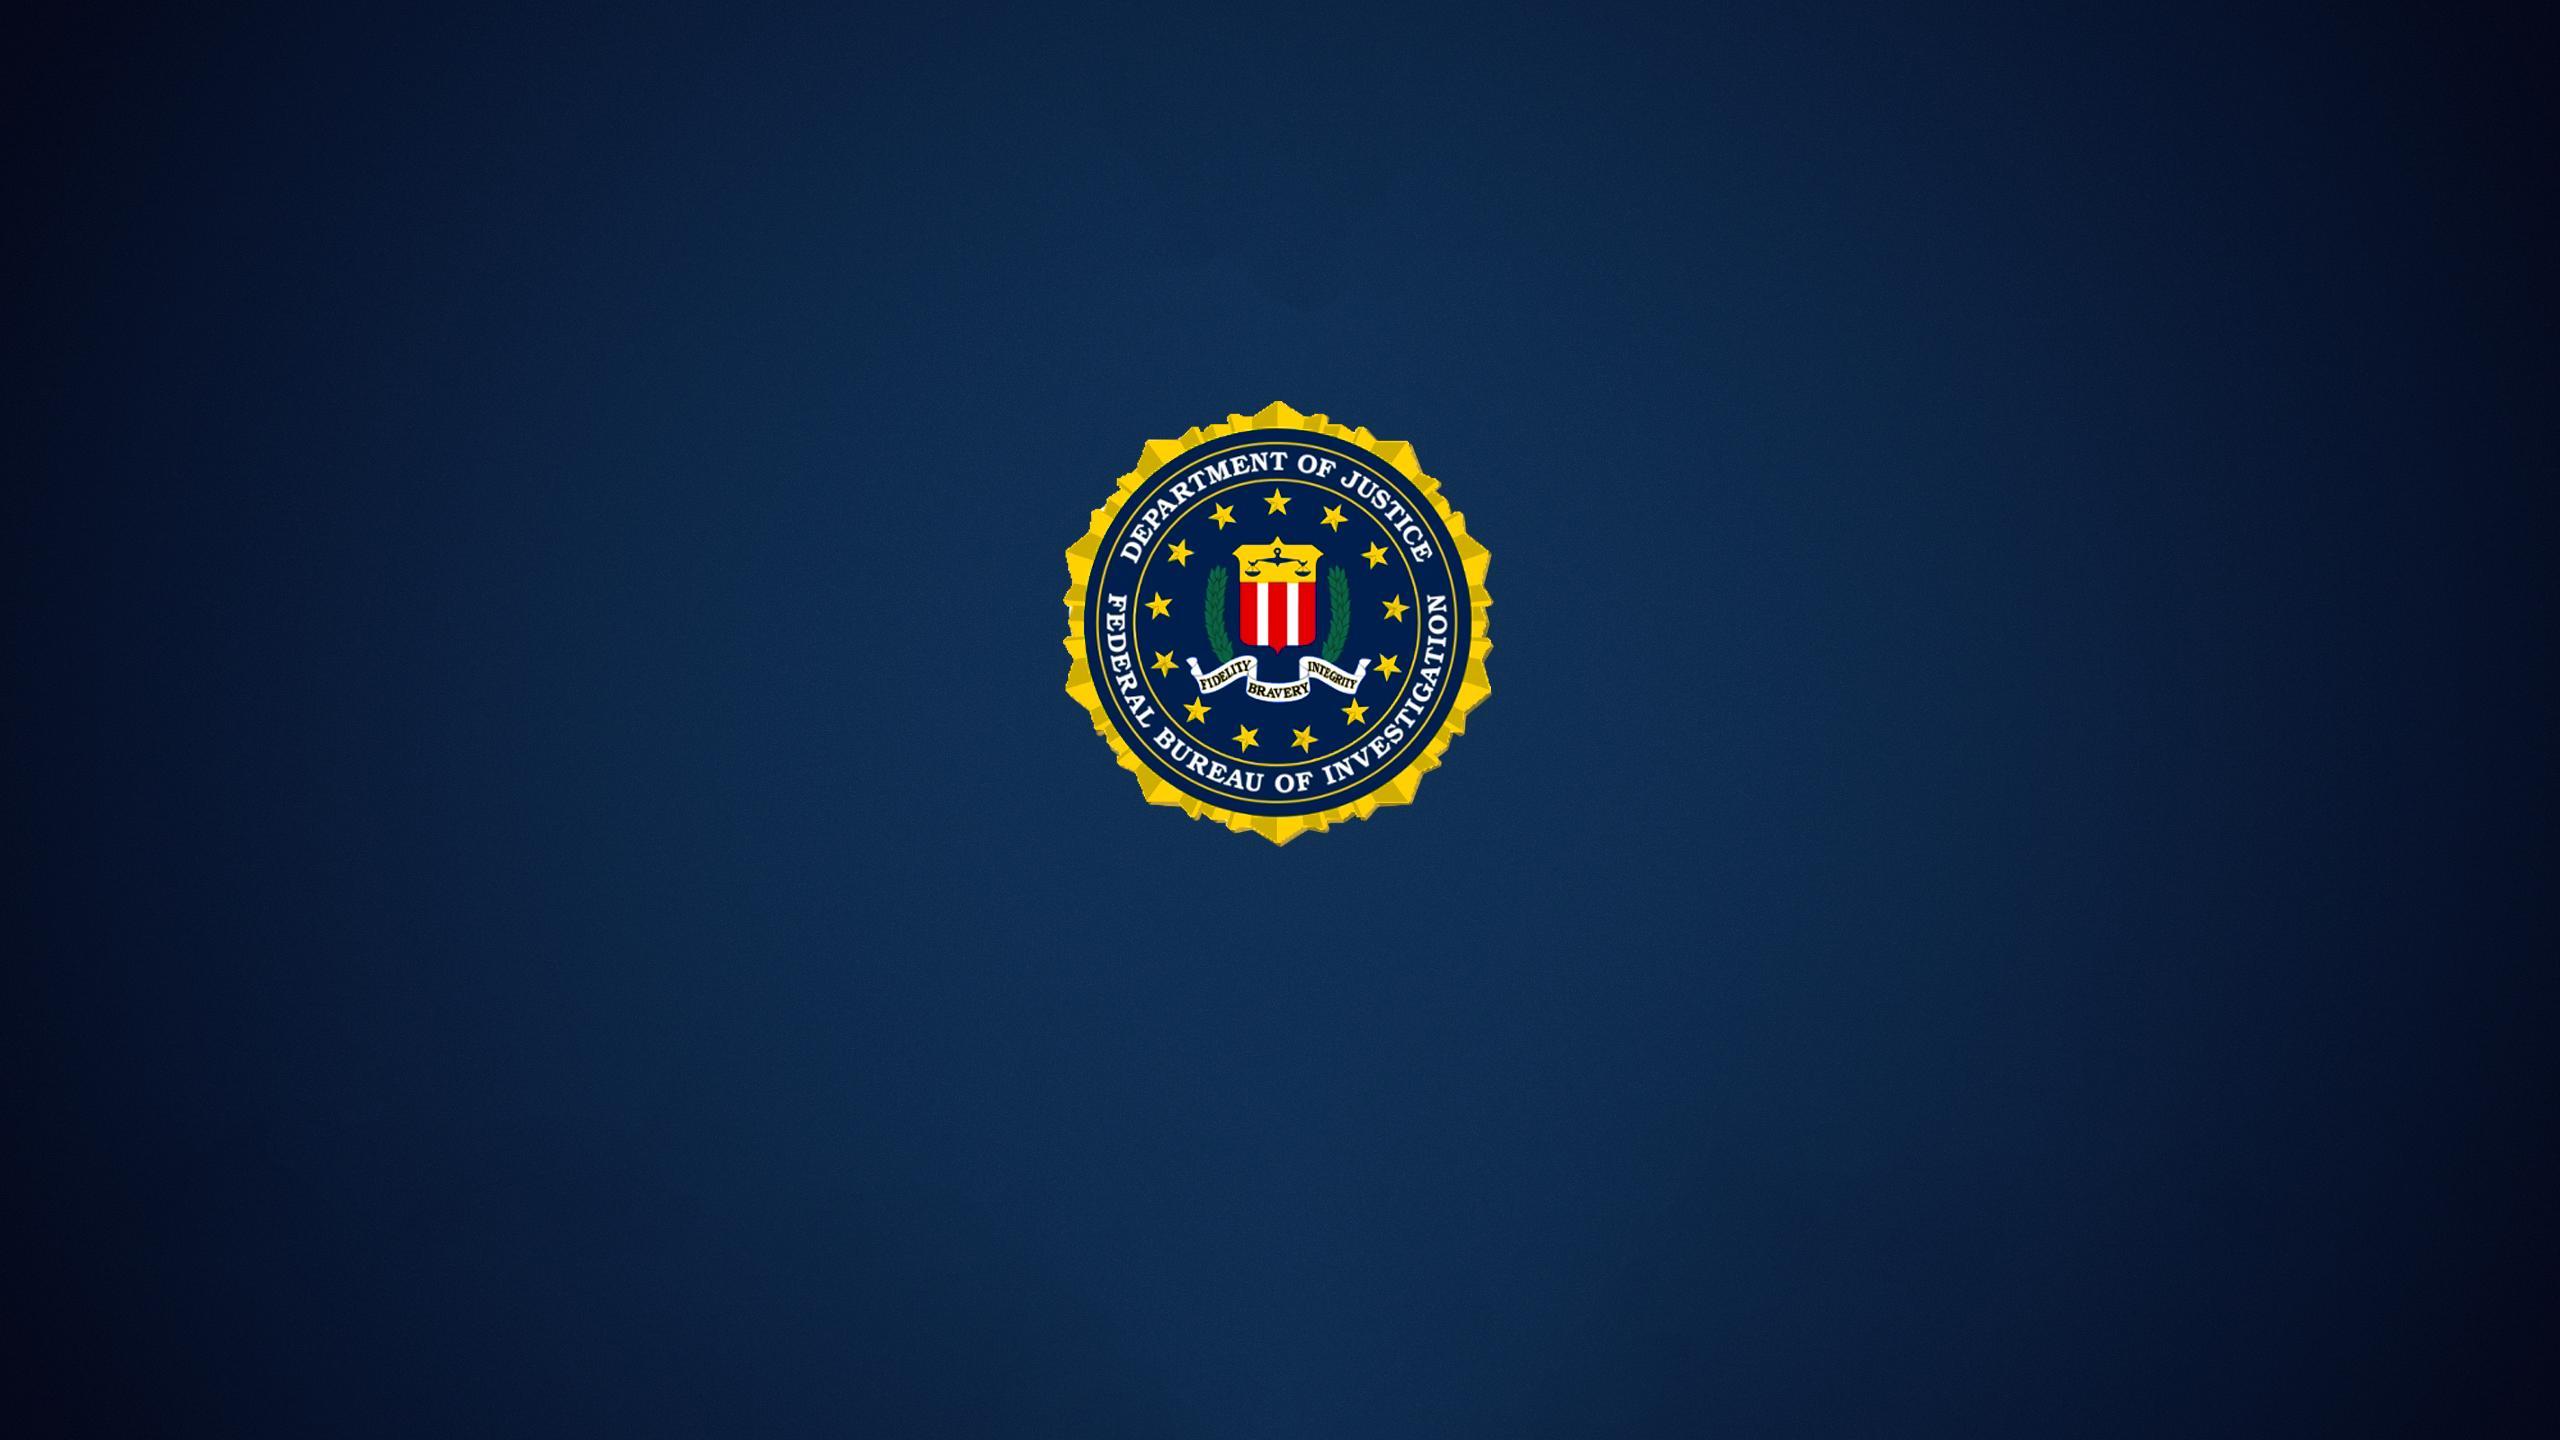 Cia logo wallpapers Gallery.